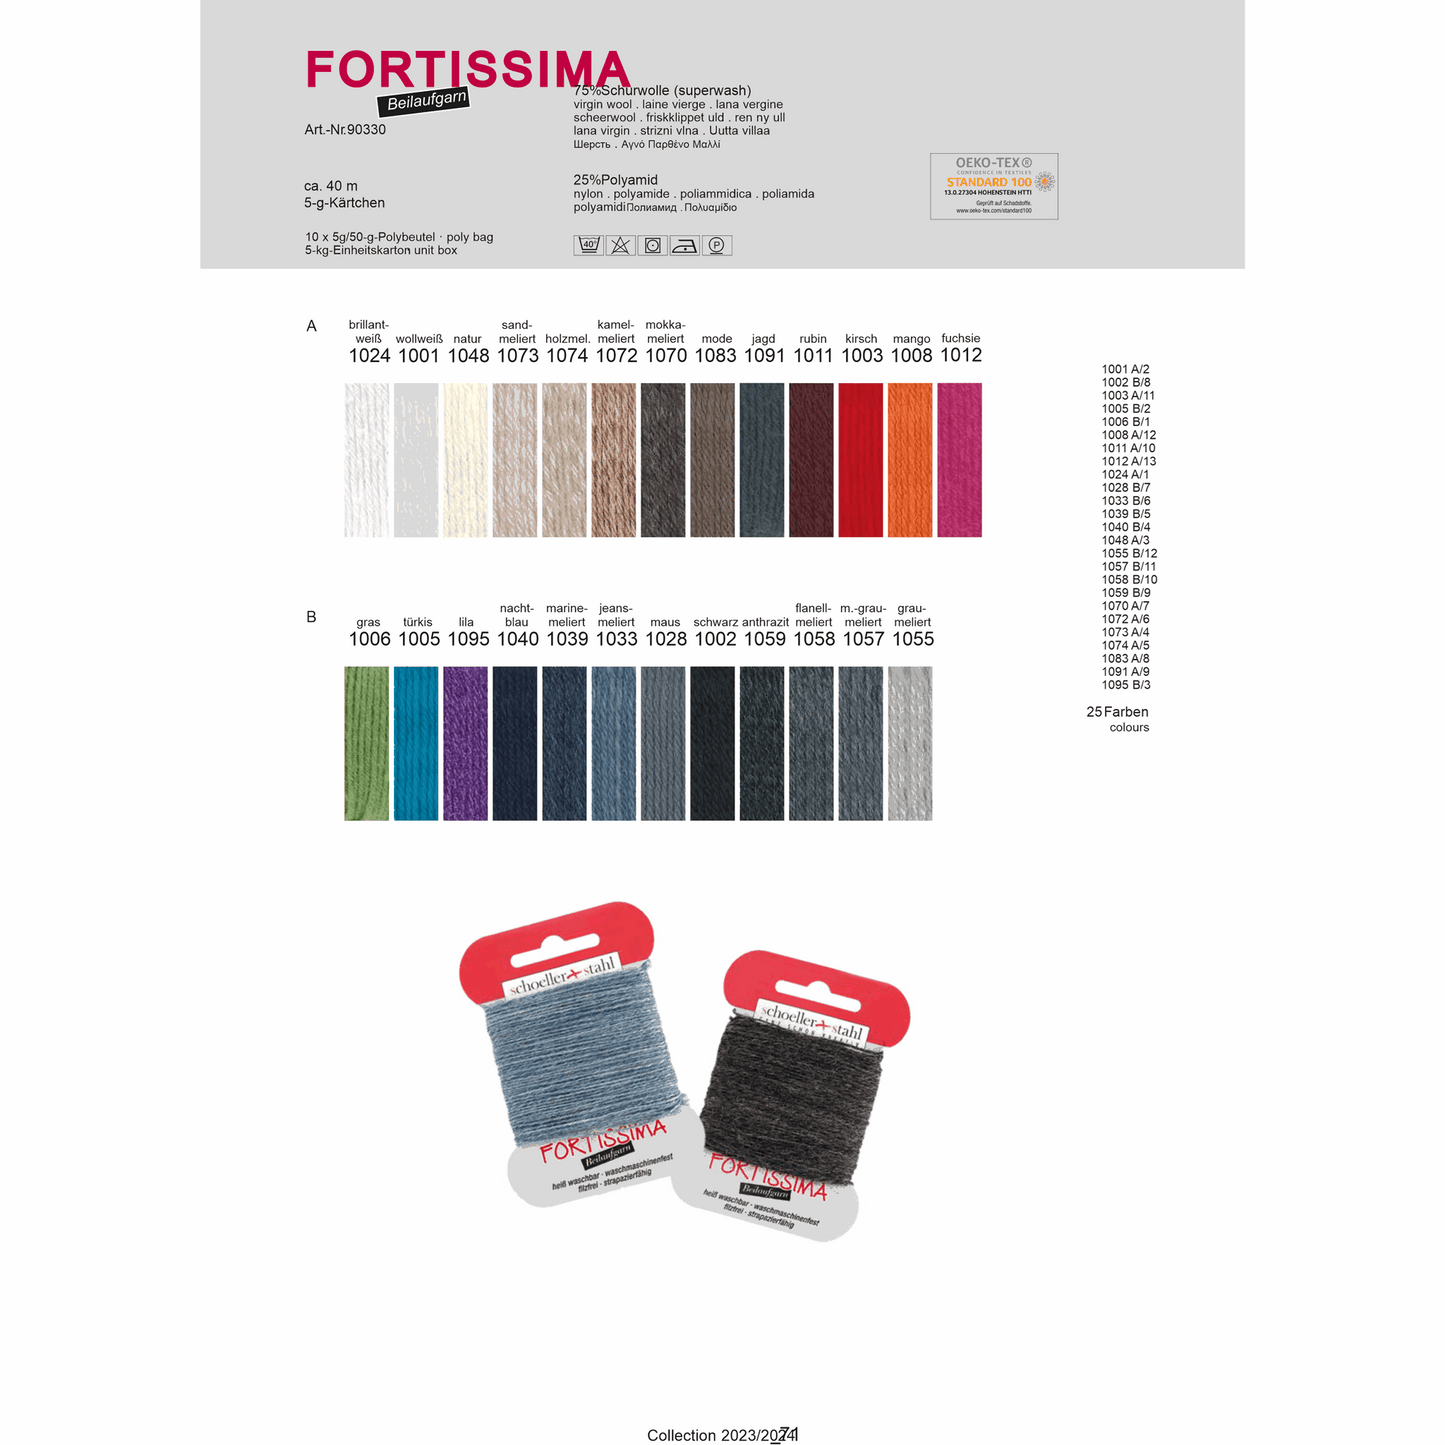 Fortissima thread 5g, 90330, color 1003, cherry